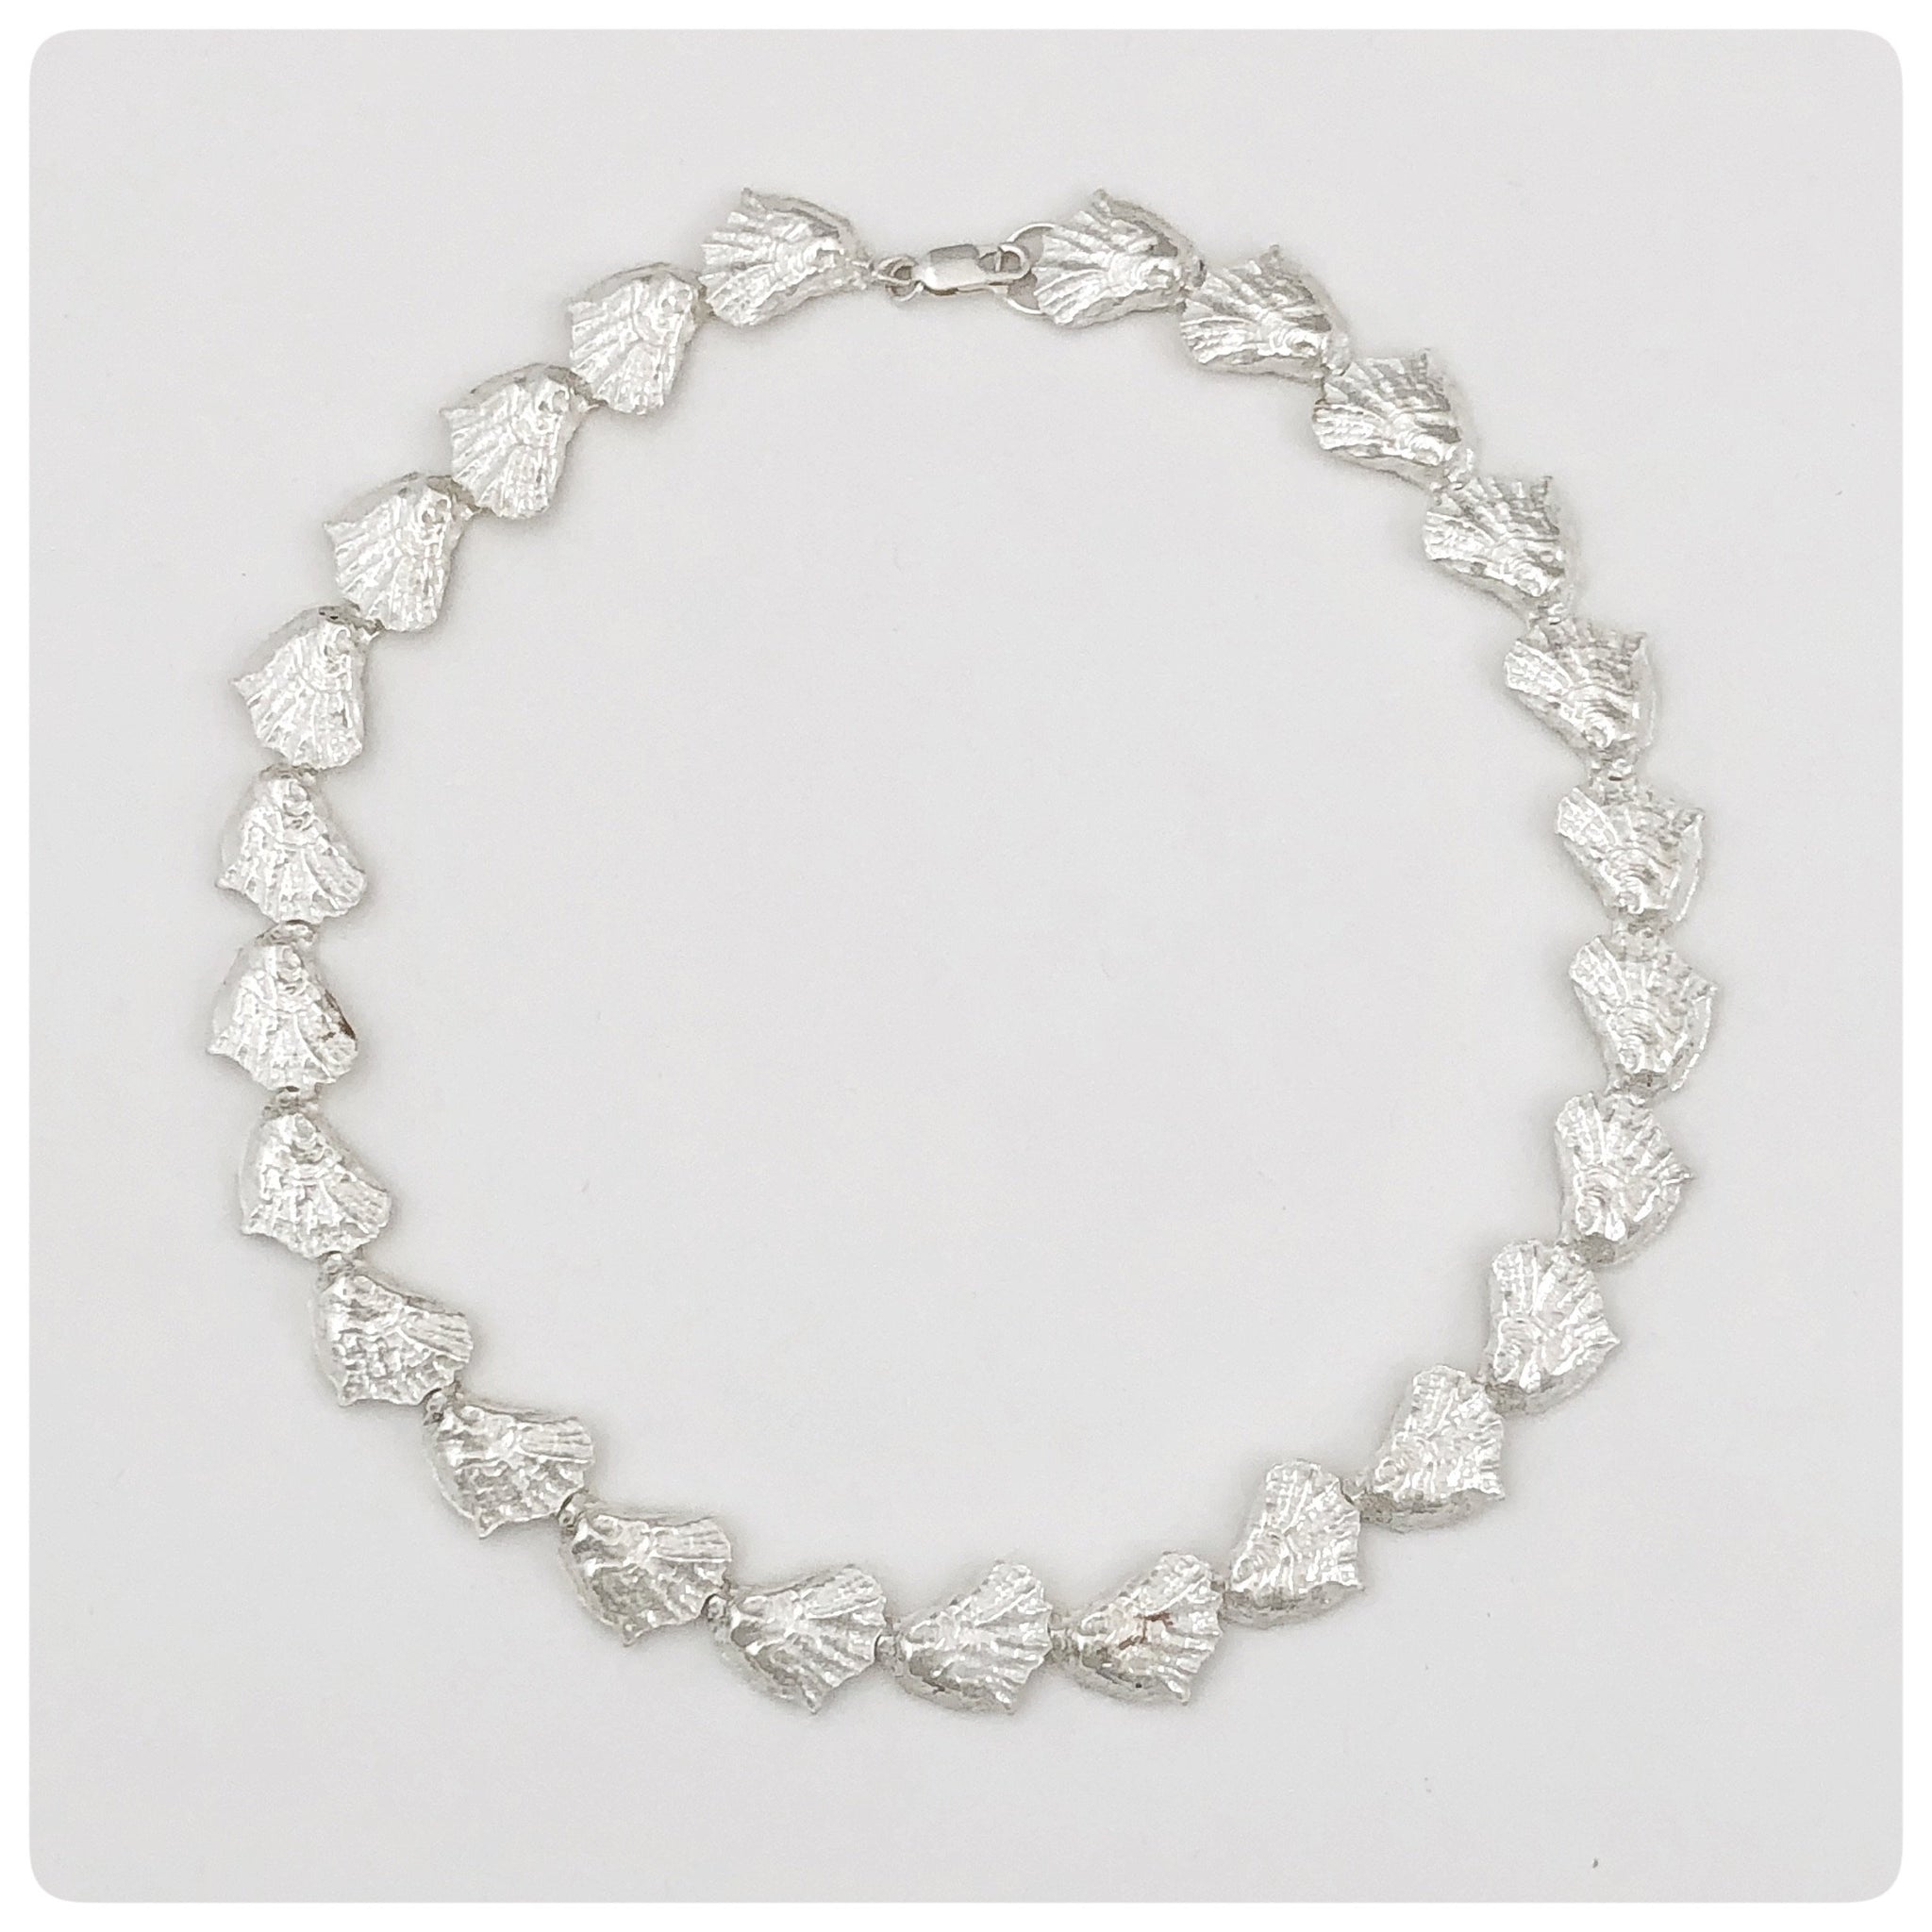 Sterling Silver Continuous Oyster Necklace, G2 Silver, Charleston, SC, New - The Silver Vault of Charleston